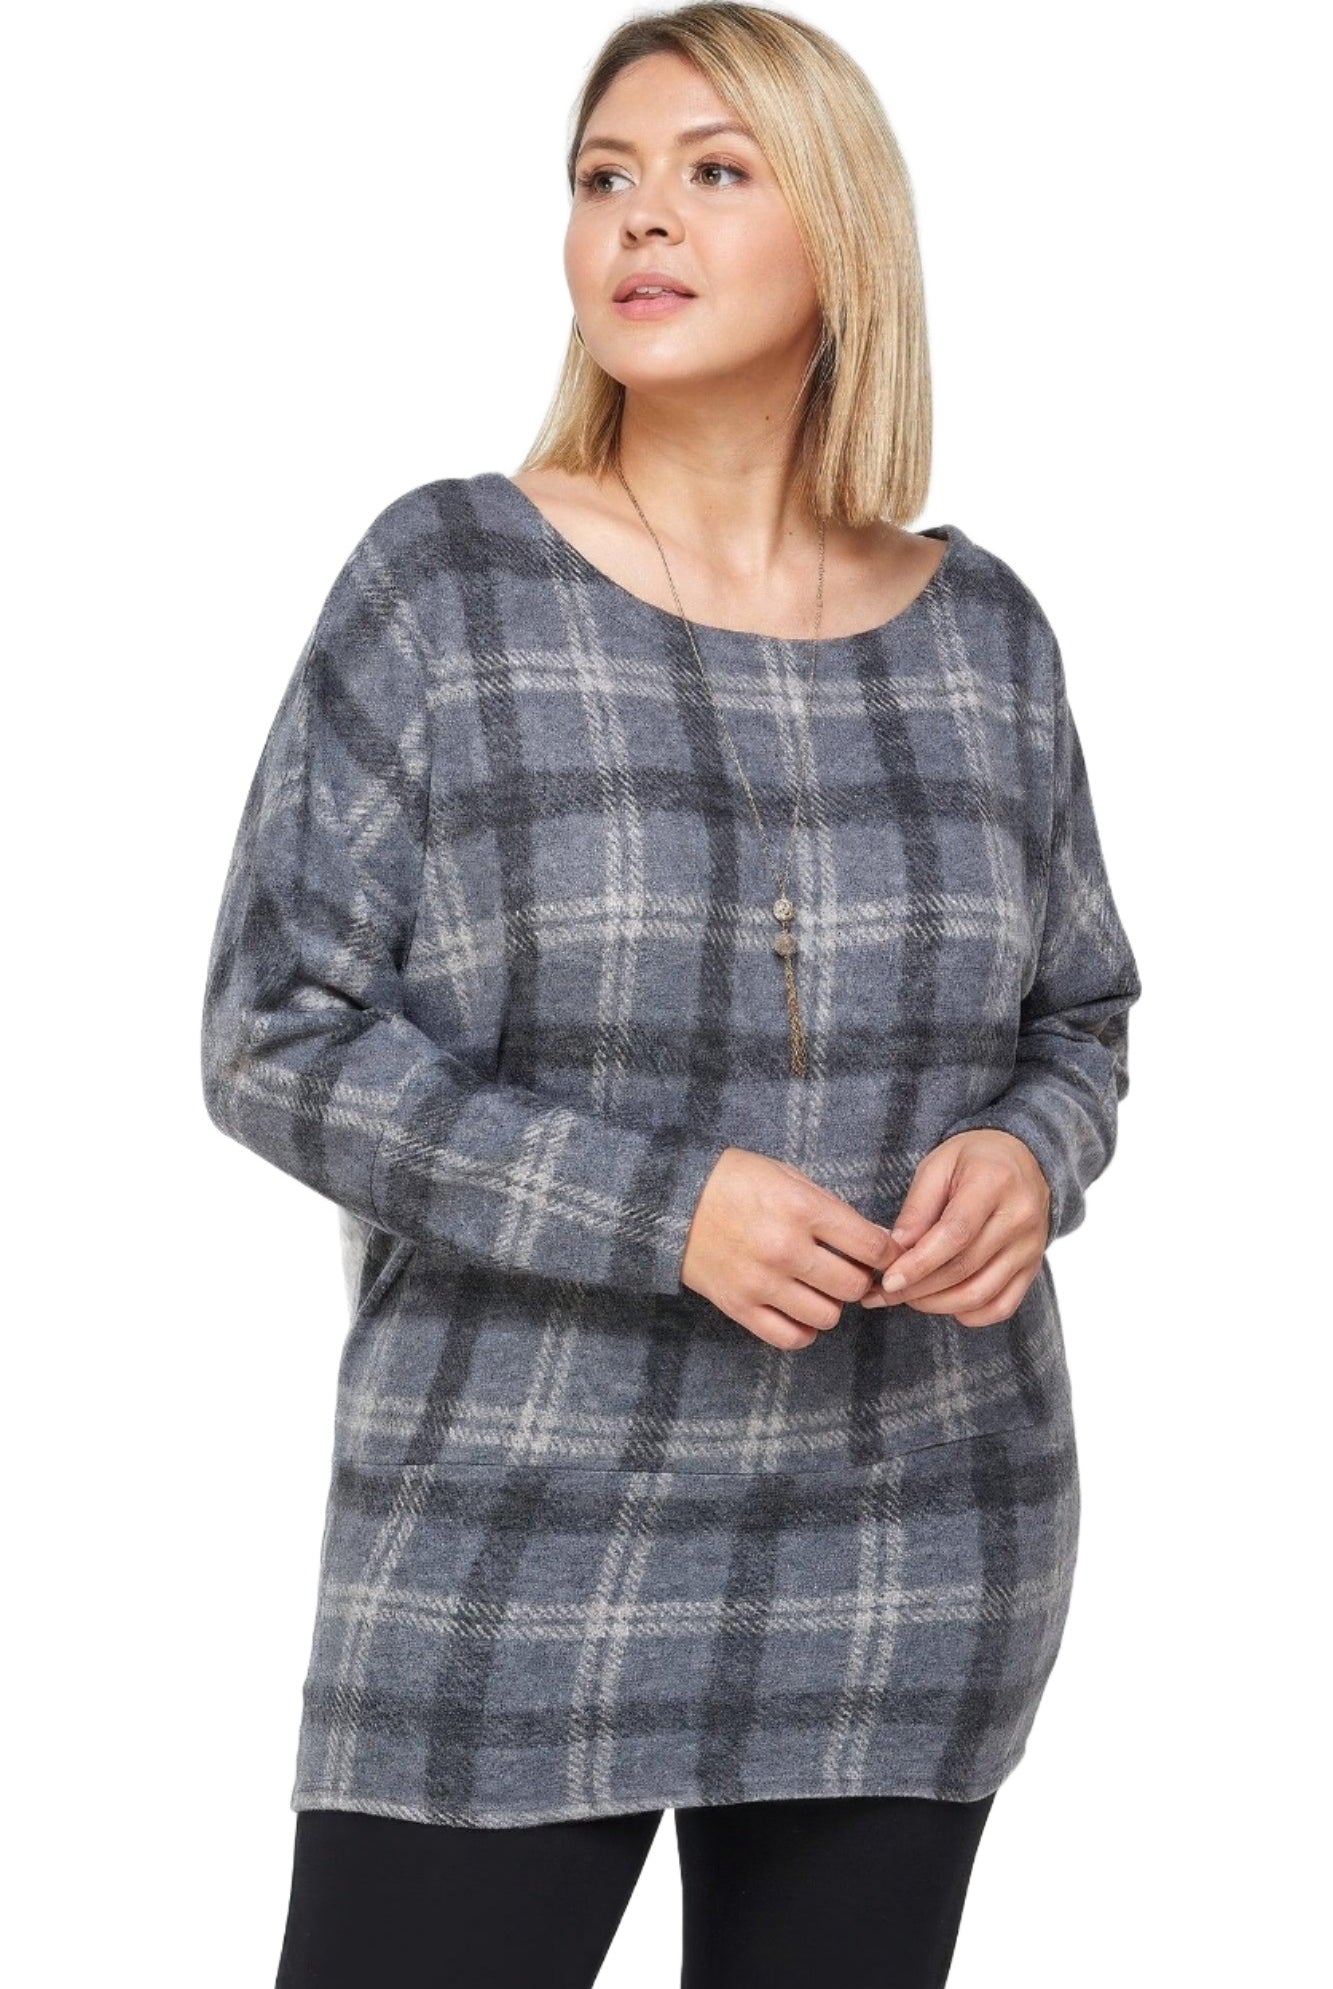 Women's Shirts Boat Neck, Plaid Print Tunic Top, With Long Dolman Sleeves